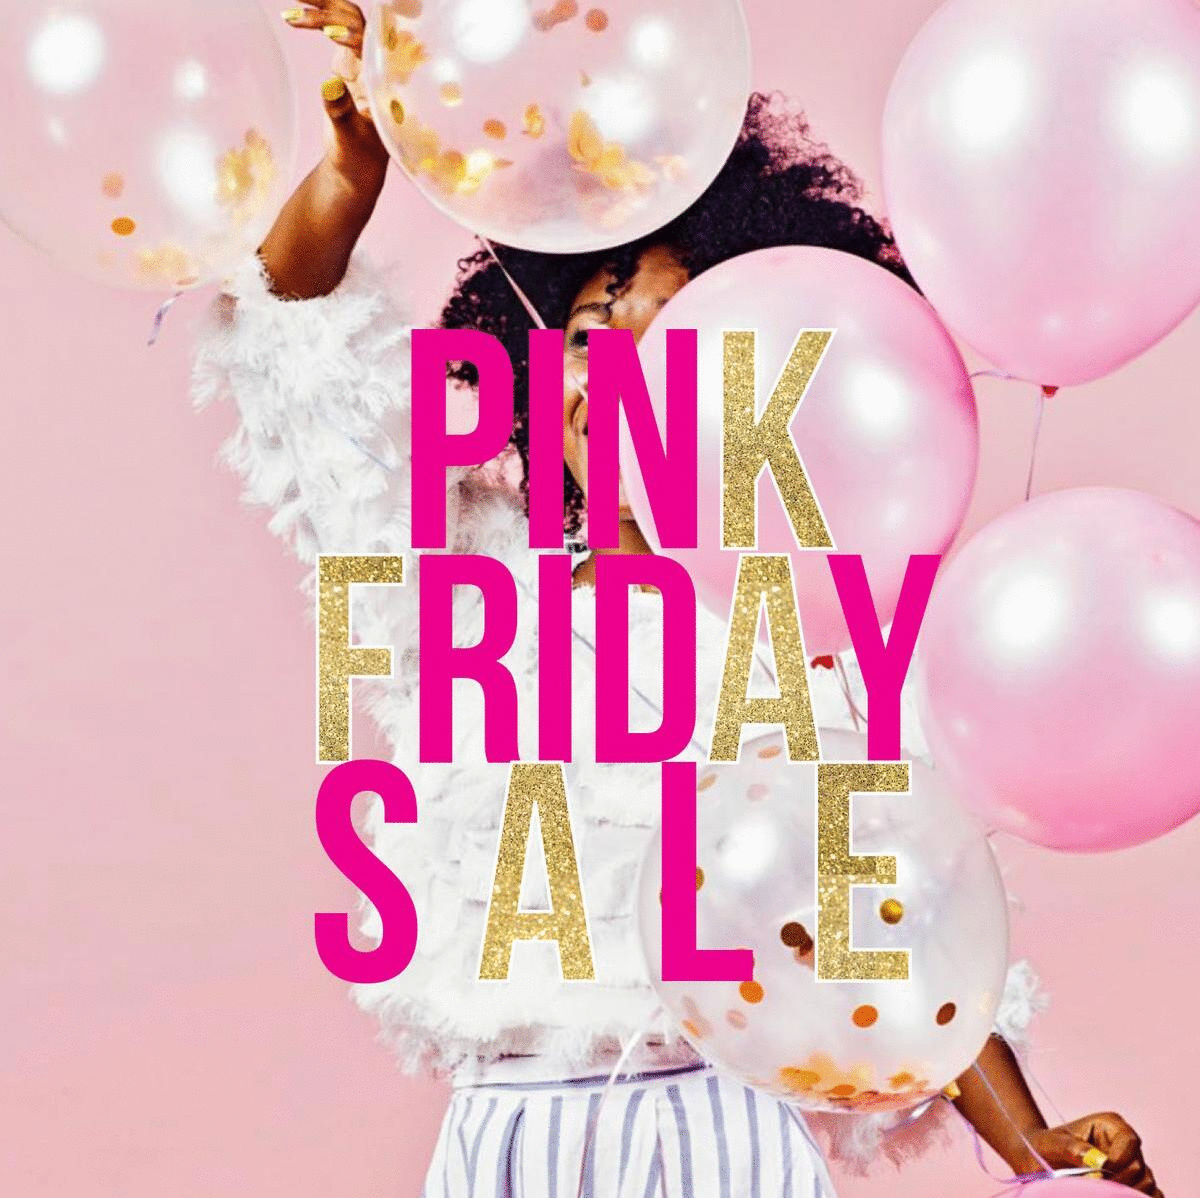 HELLO PINK Friday  Our Biggest Sale of 2020 Starts NOW!!﻿ - Effie's Paper